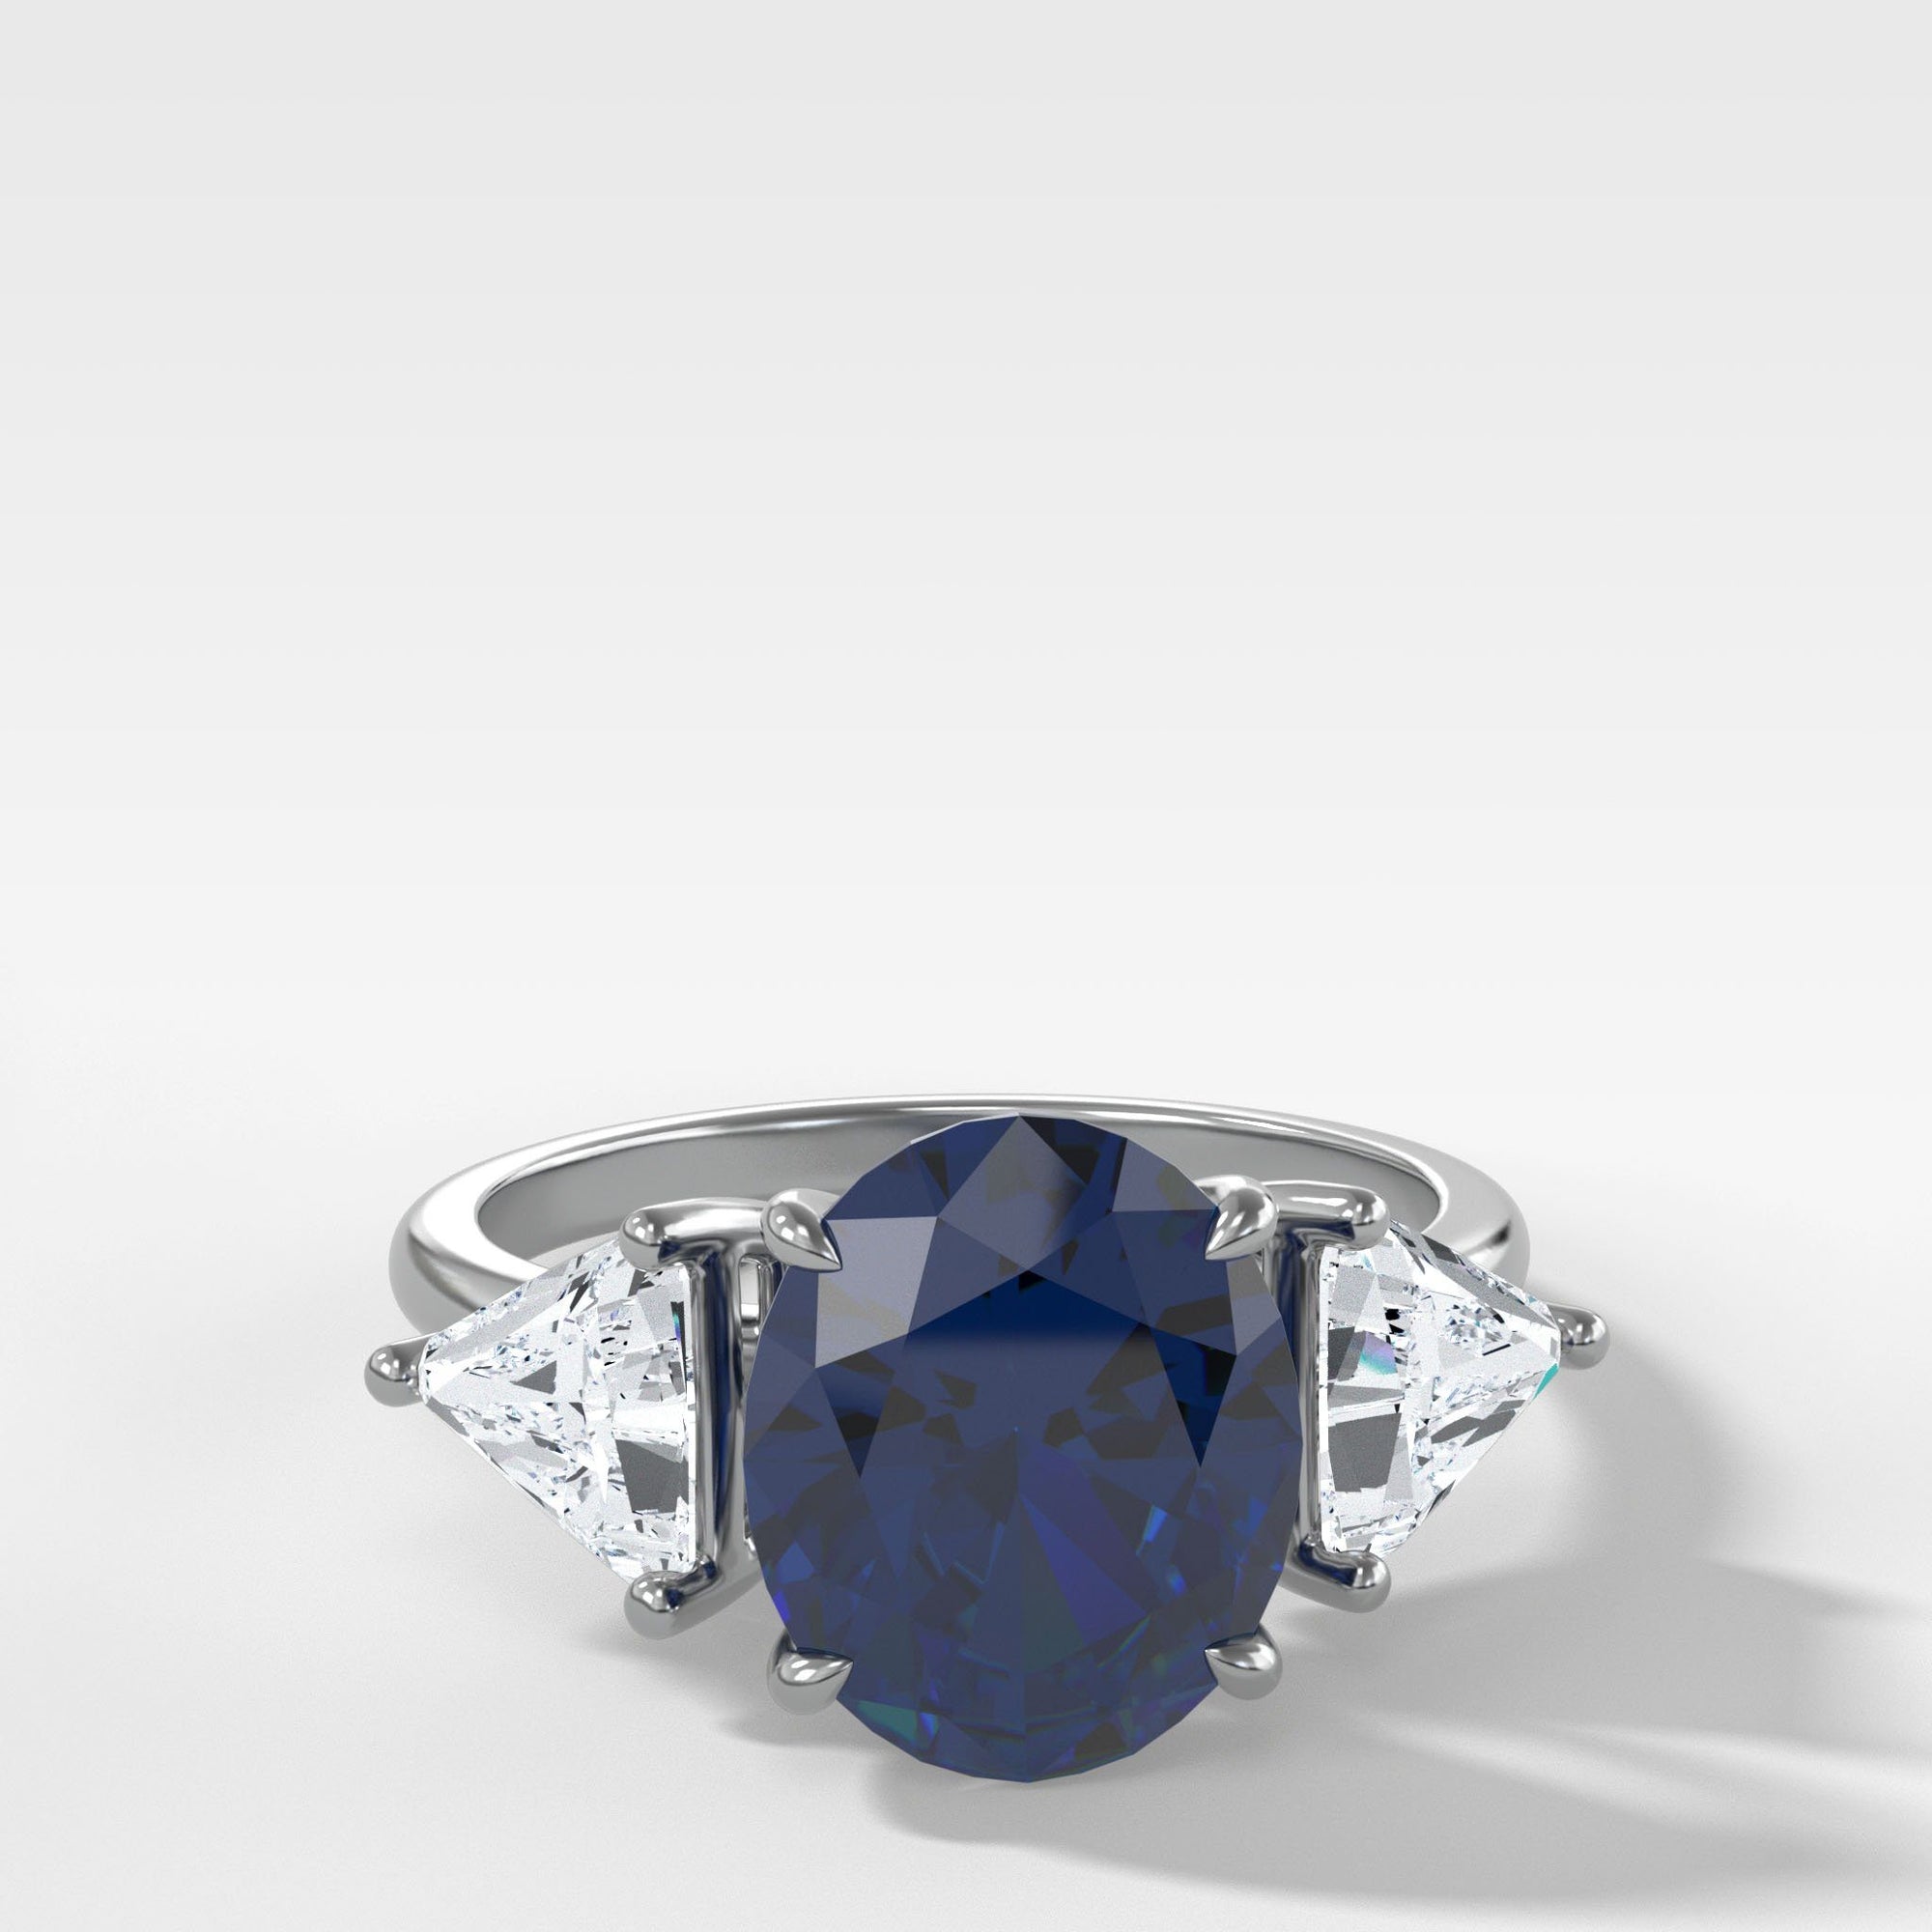 Oval Cut Sapphire Three Stone Engagement Ring With Trilliant Cut Diamond Sides by Good Stone in Yellow Gold